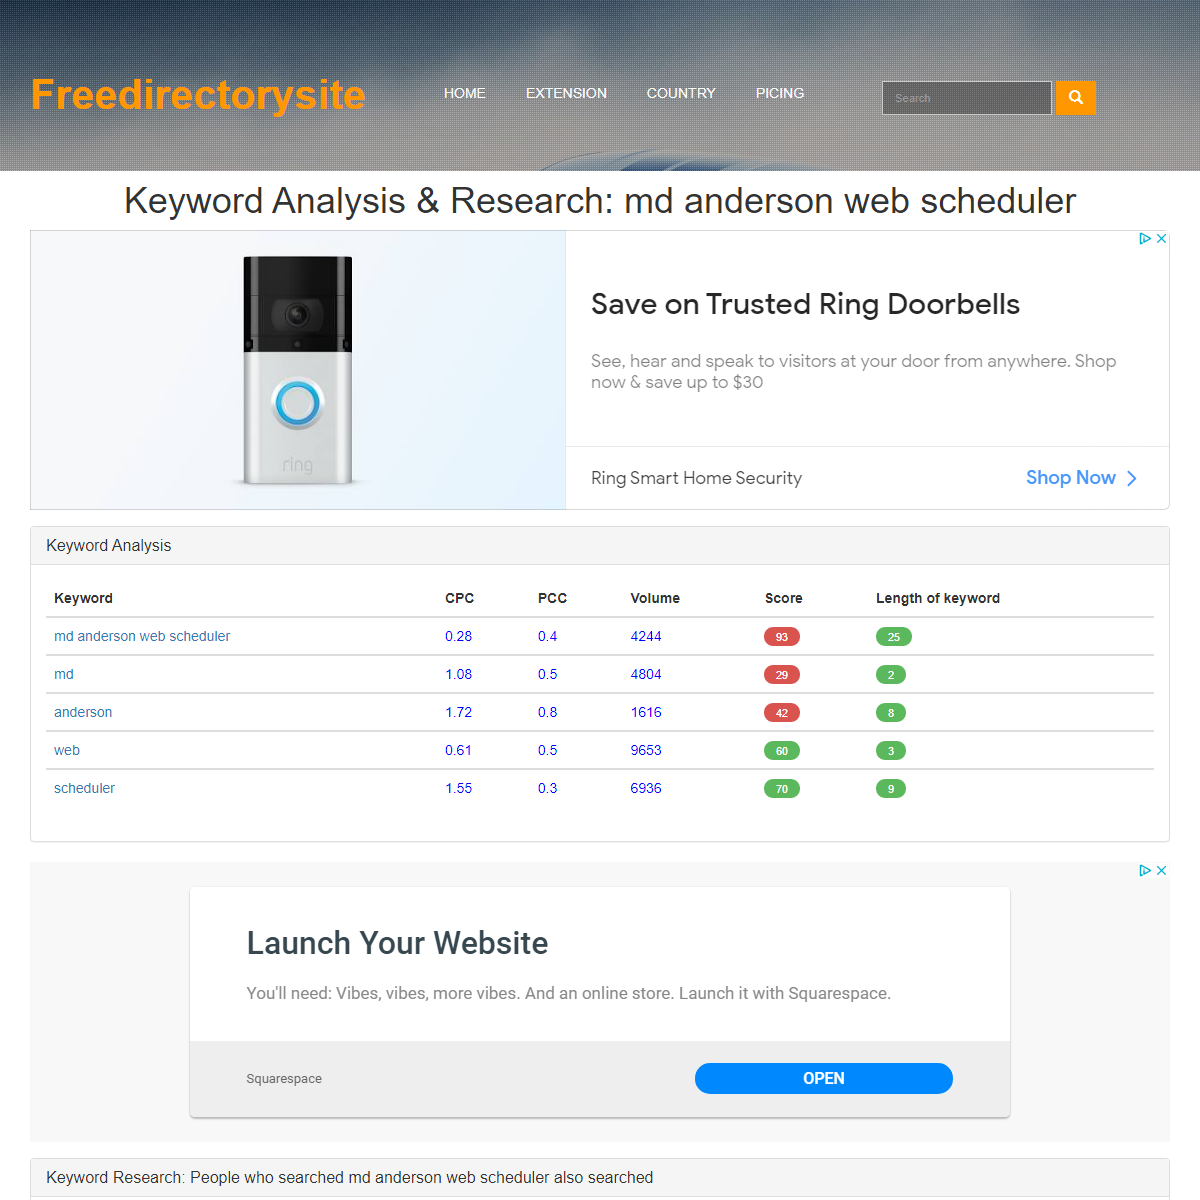 A complete backup of https://www.freedirectorysite.com/search/md-anderson-web-scheduler